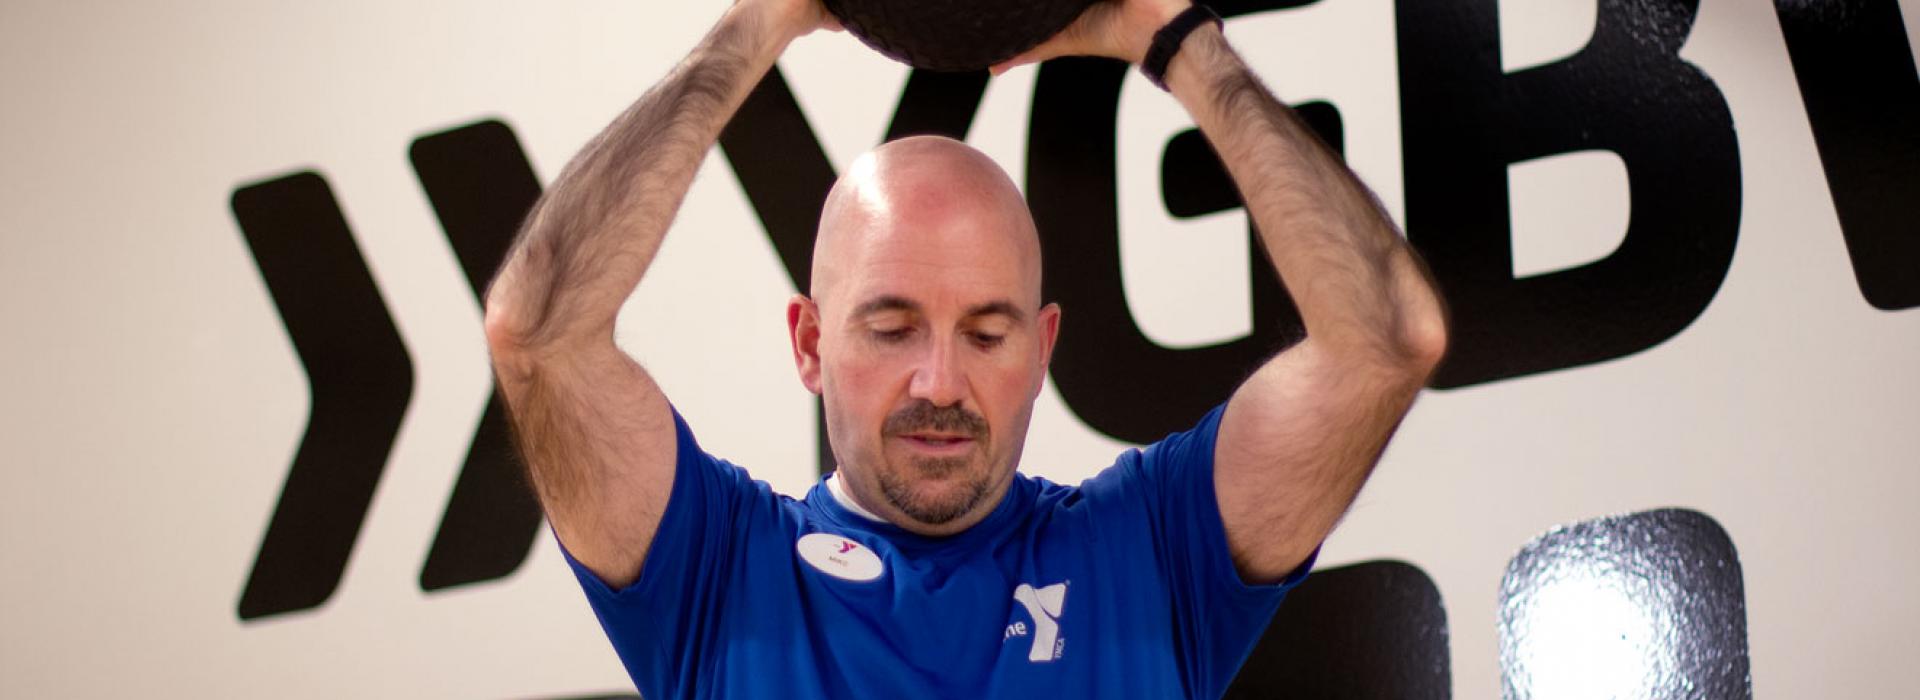 Kennett Area YMCA personal trainer Mike Lobiondo demonstrates an exercise using a weighted ball.